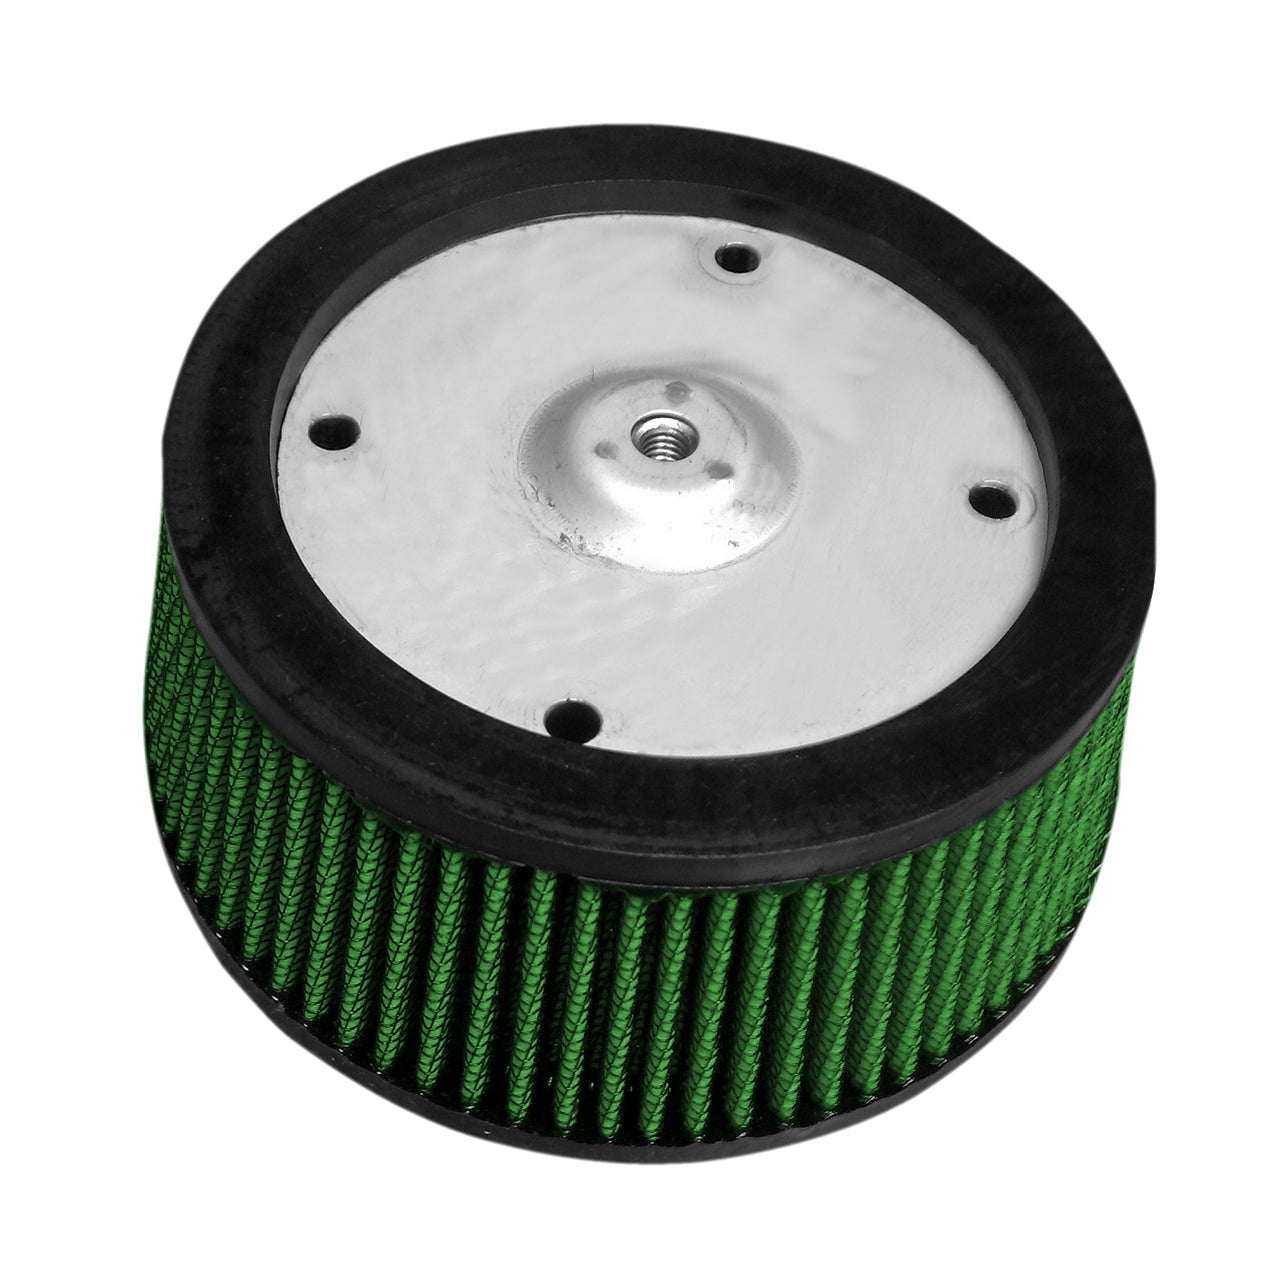 Green Filter 08+ Harley (Touring) Screaming Eagle 4-Hole Filter - ID 5.25in. / H 2.25in.